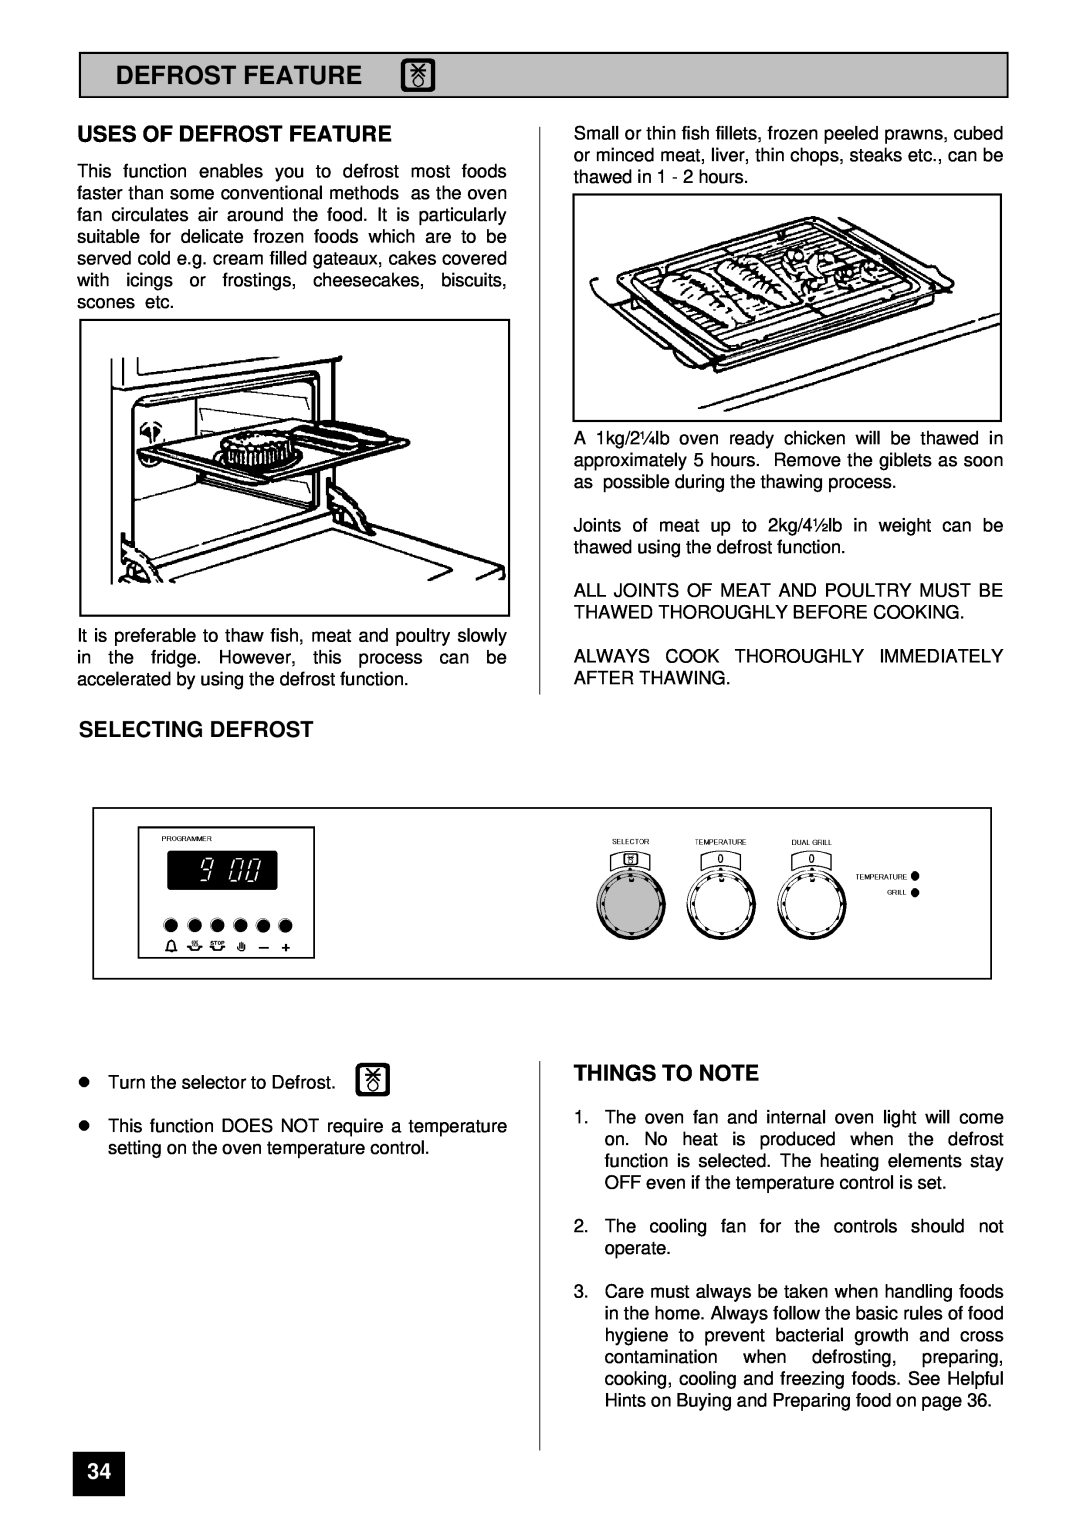 Tricity Bendix SURREY installation instructions Uses Of Defrost Feature, Selecting Defrost, Things To Note 